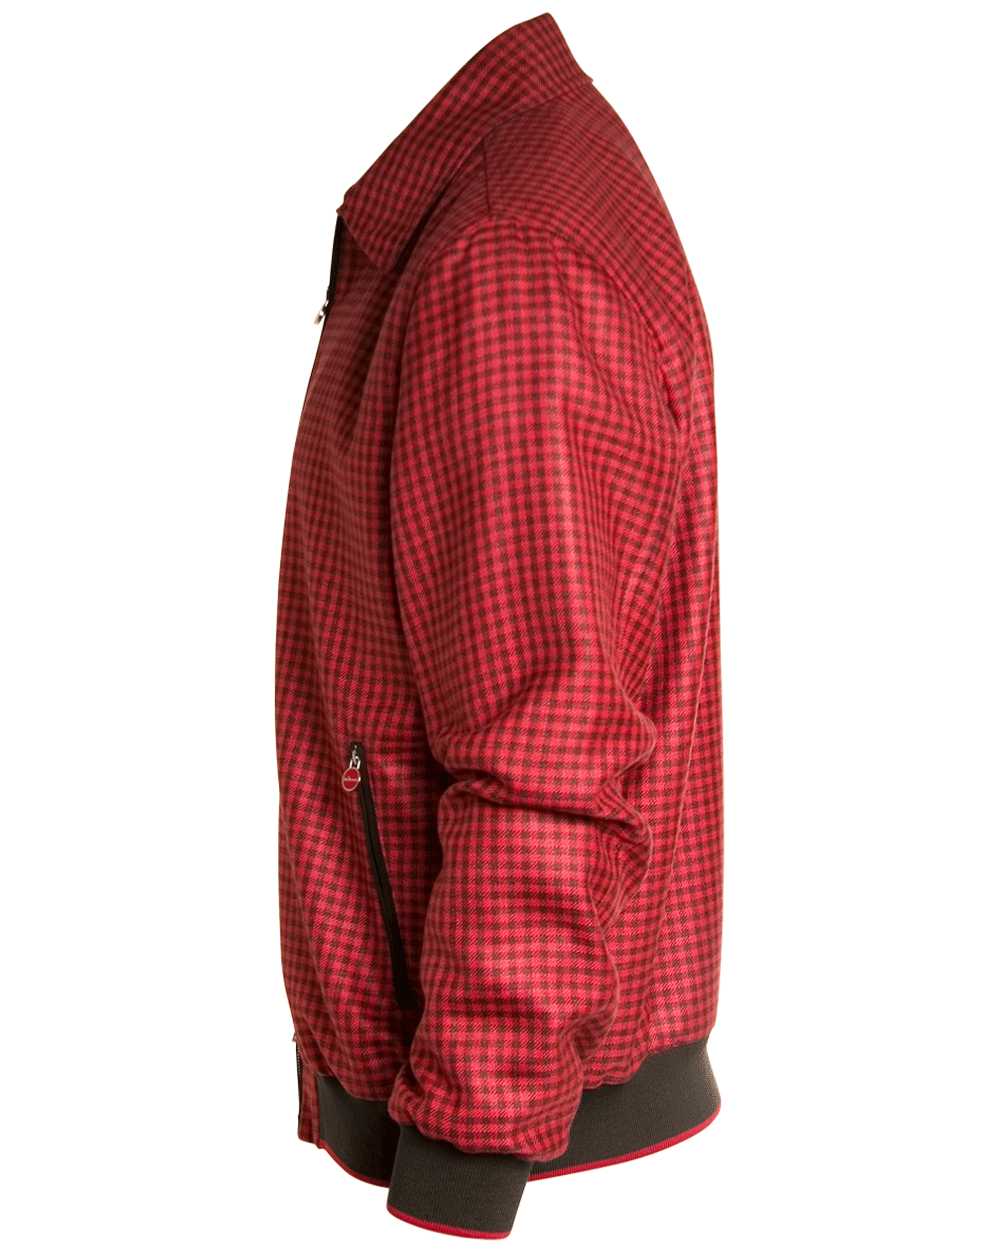 Red Burgundy Check Bomber Jacket with Suede Trim